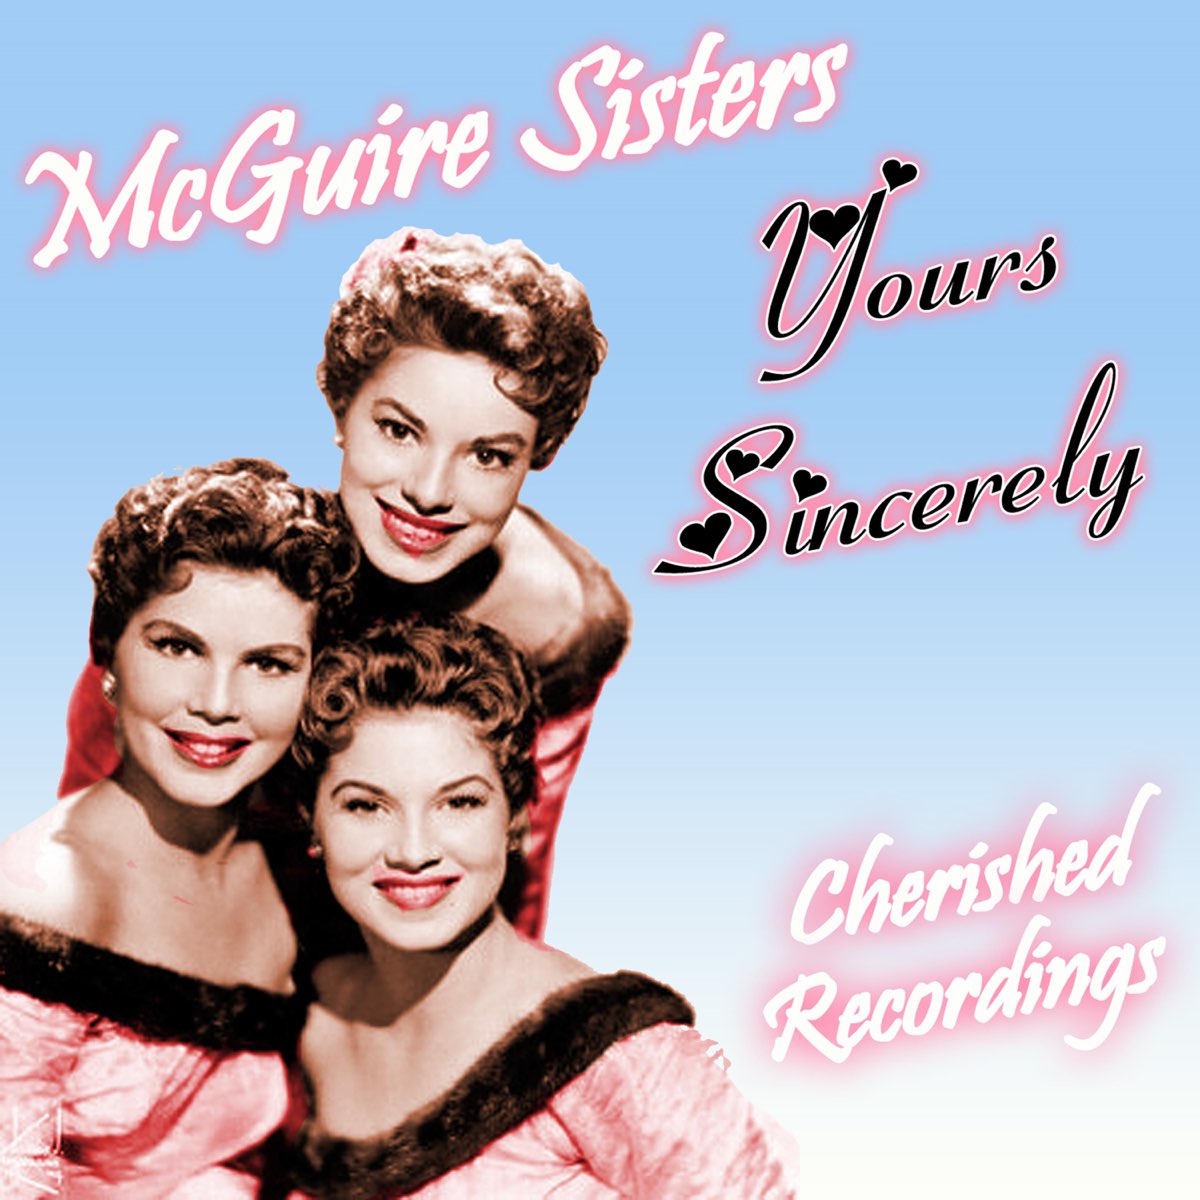 Sisters текст. MCGUIRE sisters Picnic 1956. True sisters. The Puppini sisters.